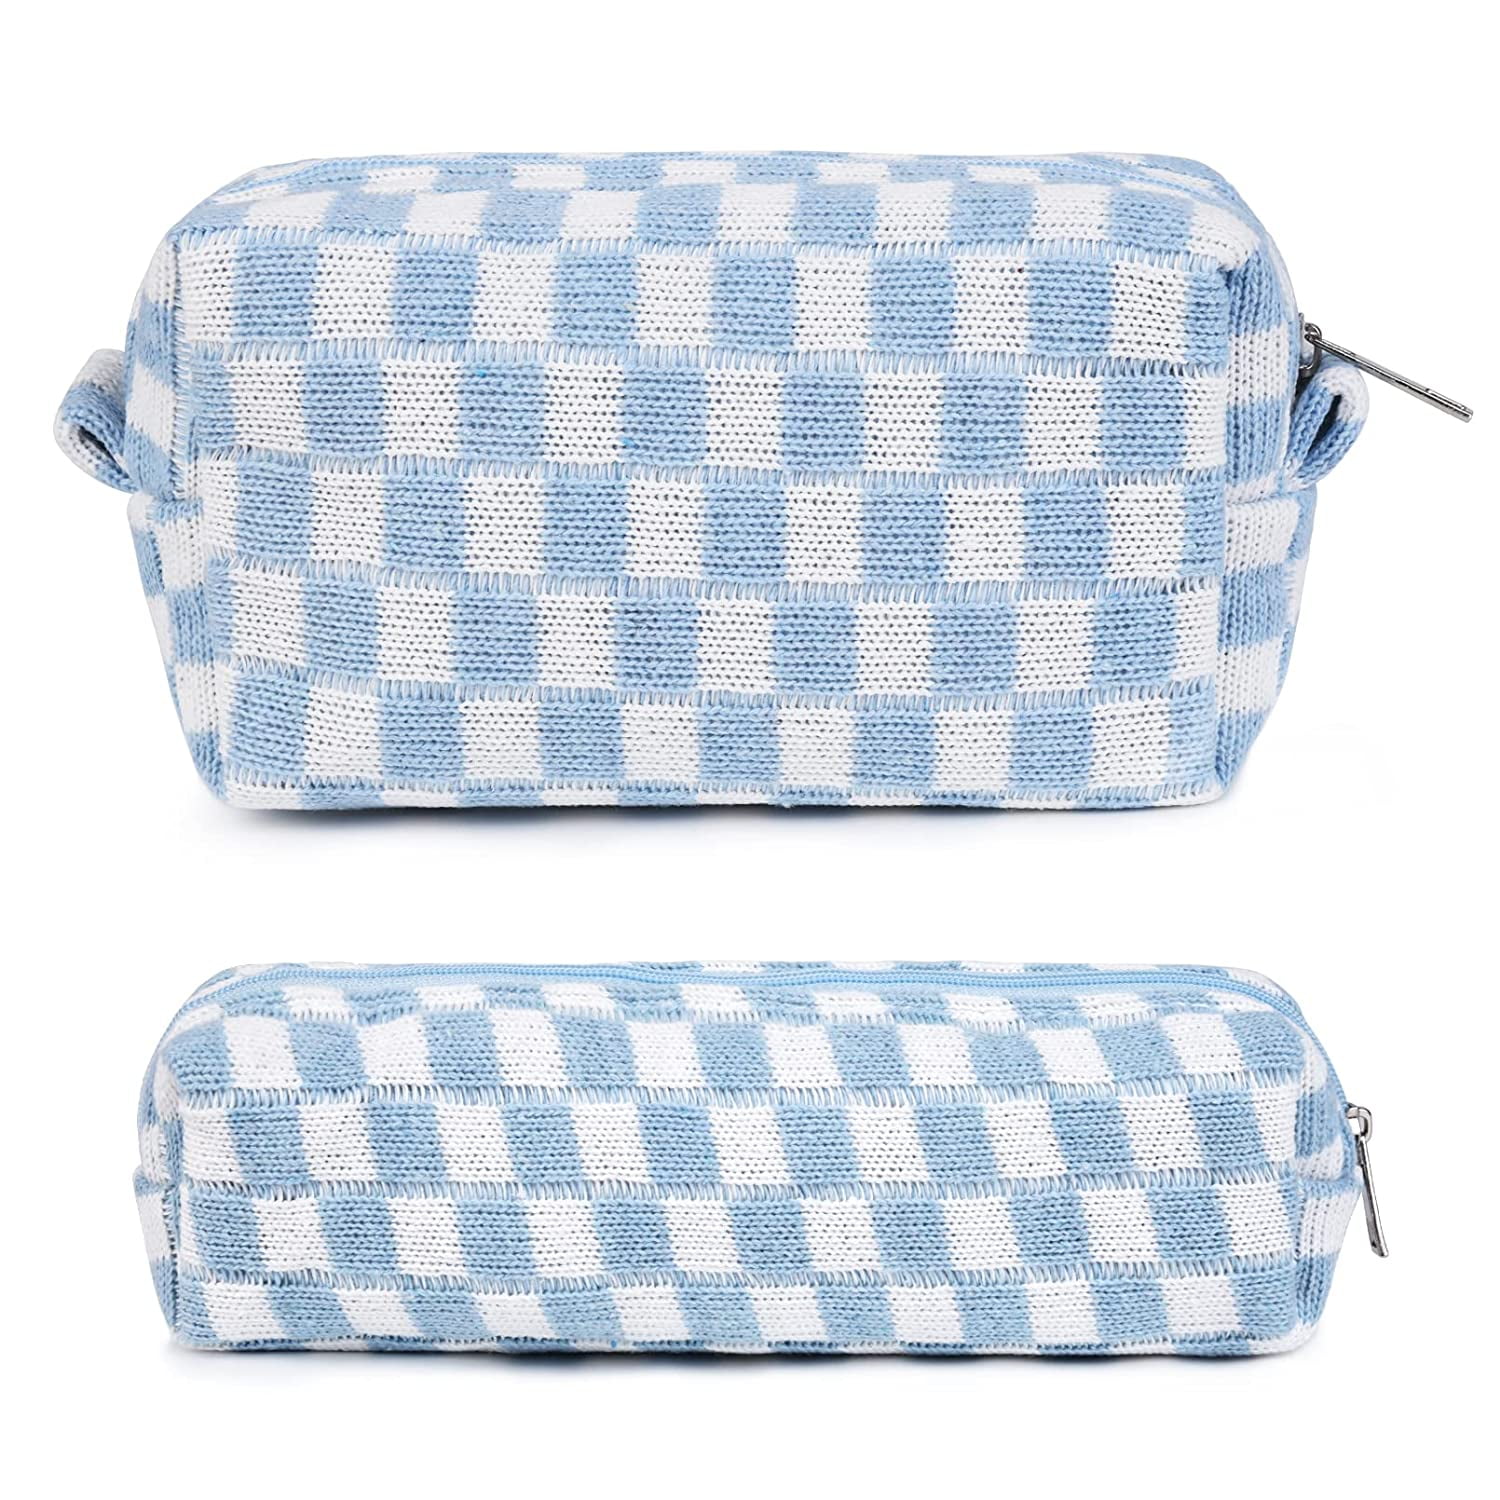  IOELOVEO Brown Checkered Makeup Bag, Cosmetic Bags for